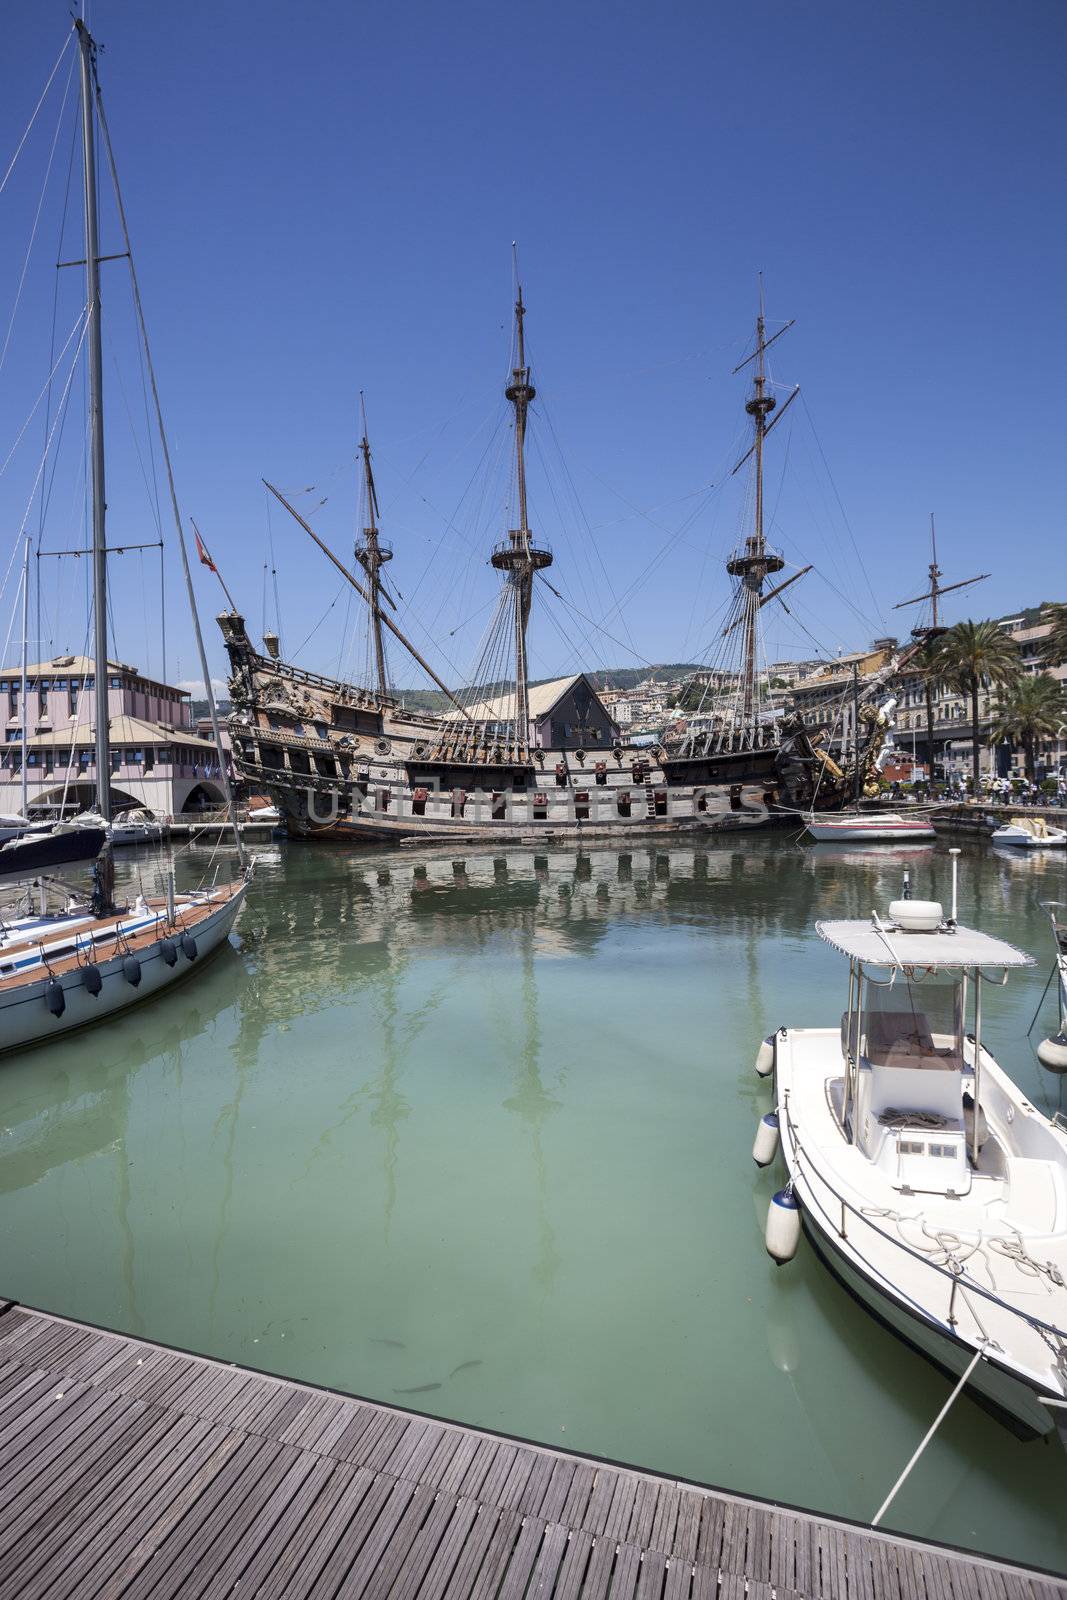 Spanish galleon replica in Genoa Old port by ints